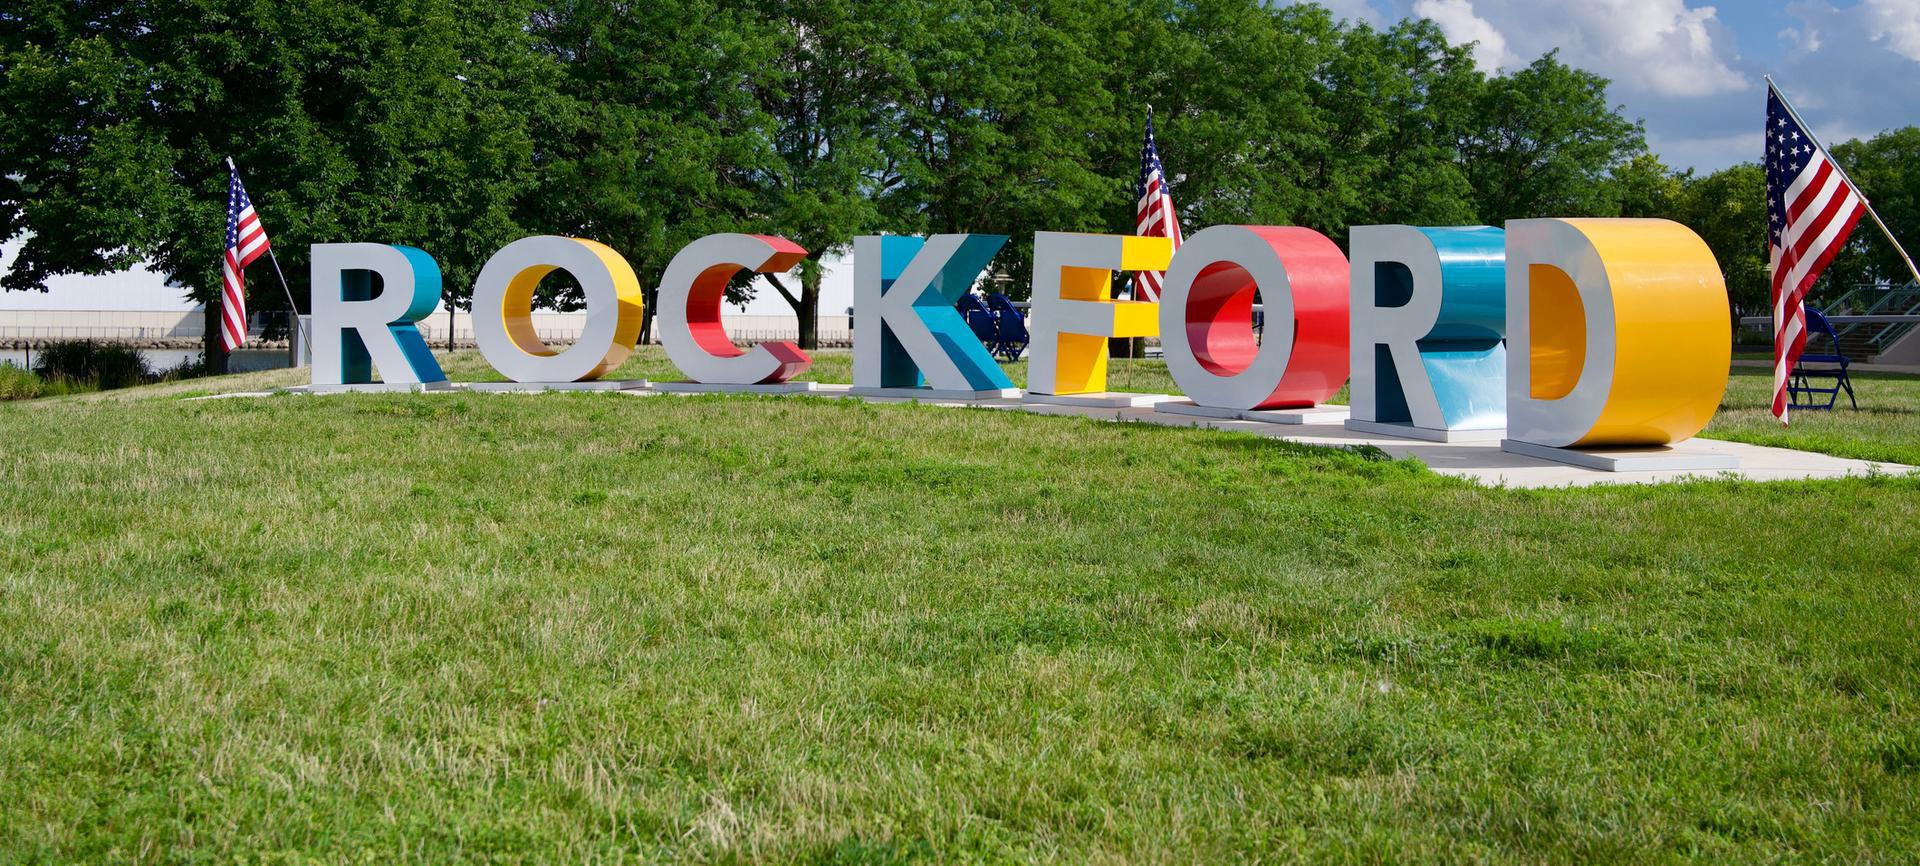 Rockford IL - Occupational Health Services - local-hero